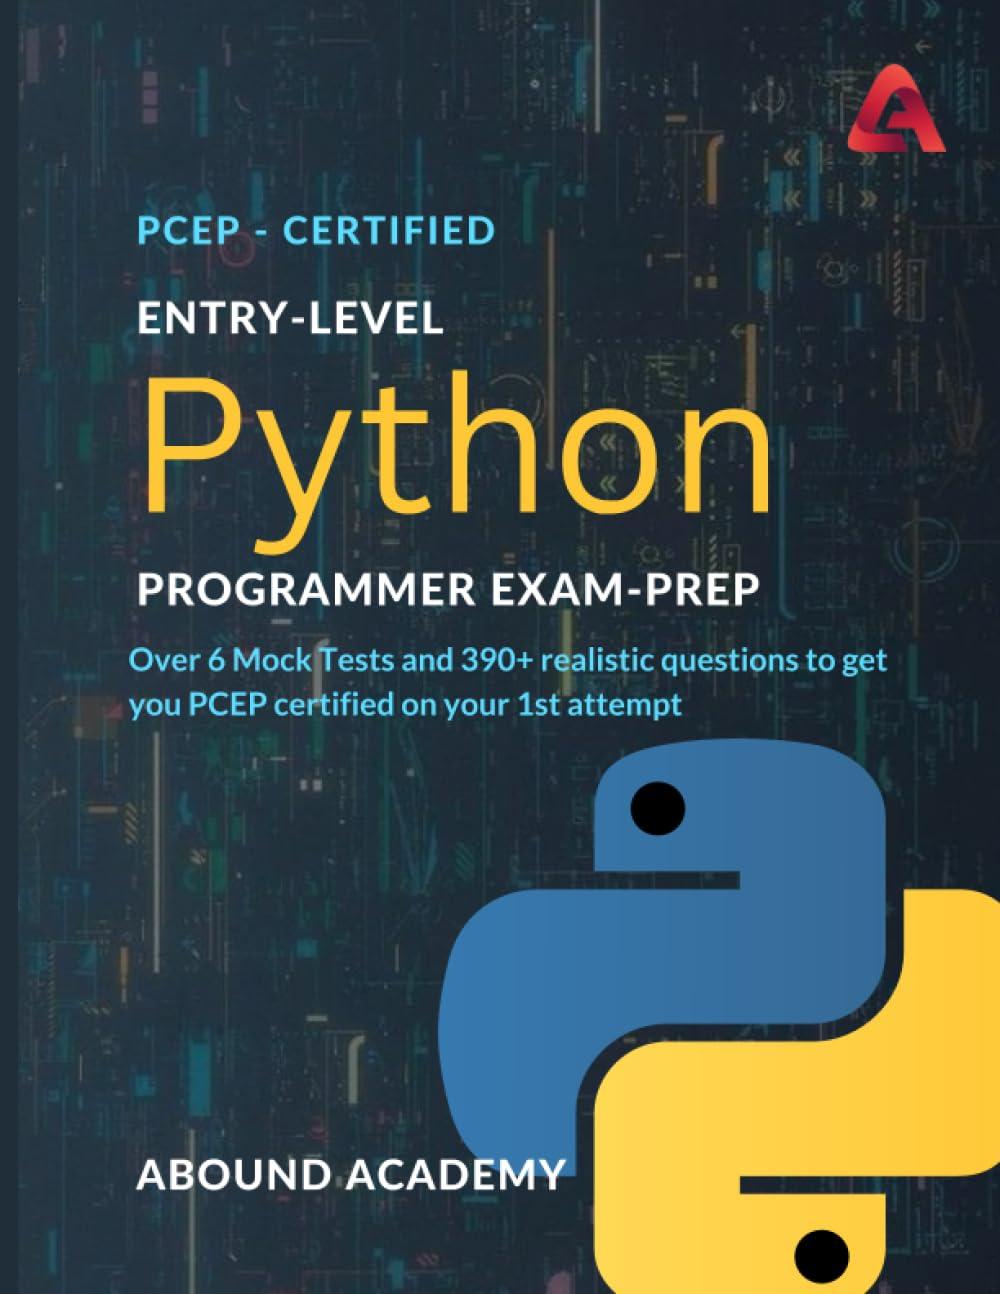 pcep certified entry level python programmer exam prep over 6 mock tests and 390+ realistic questions to get